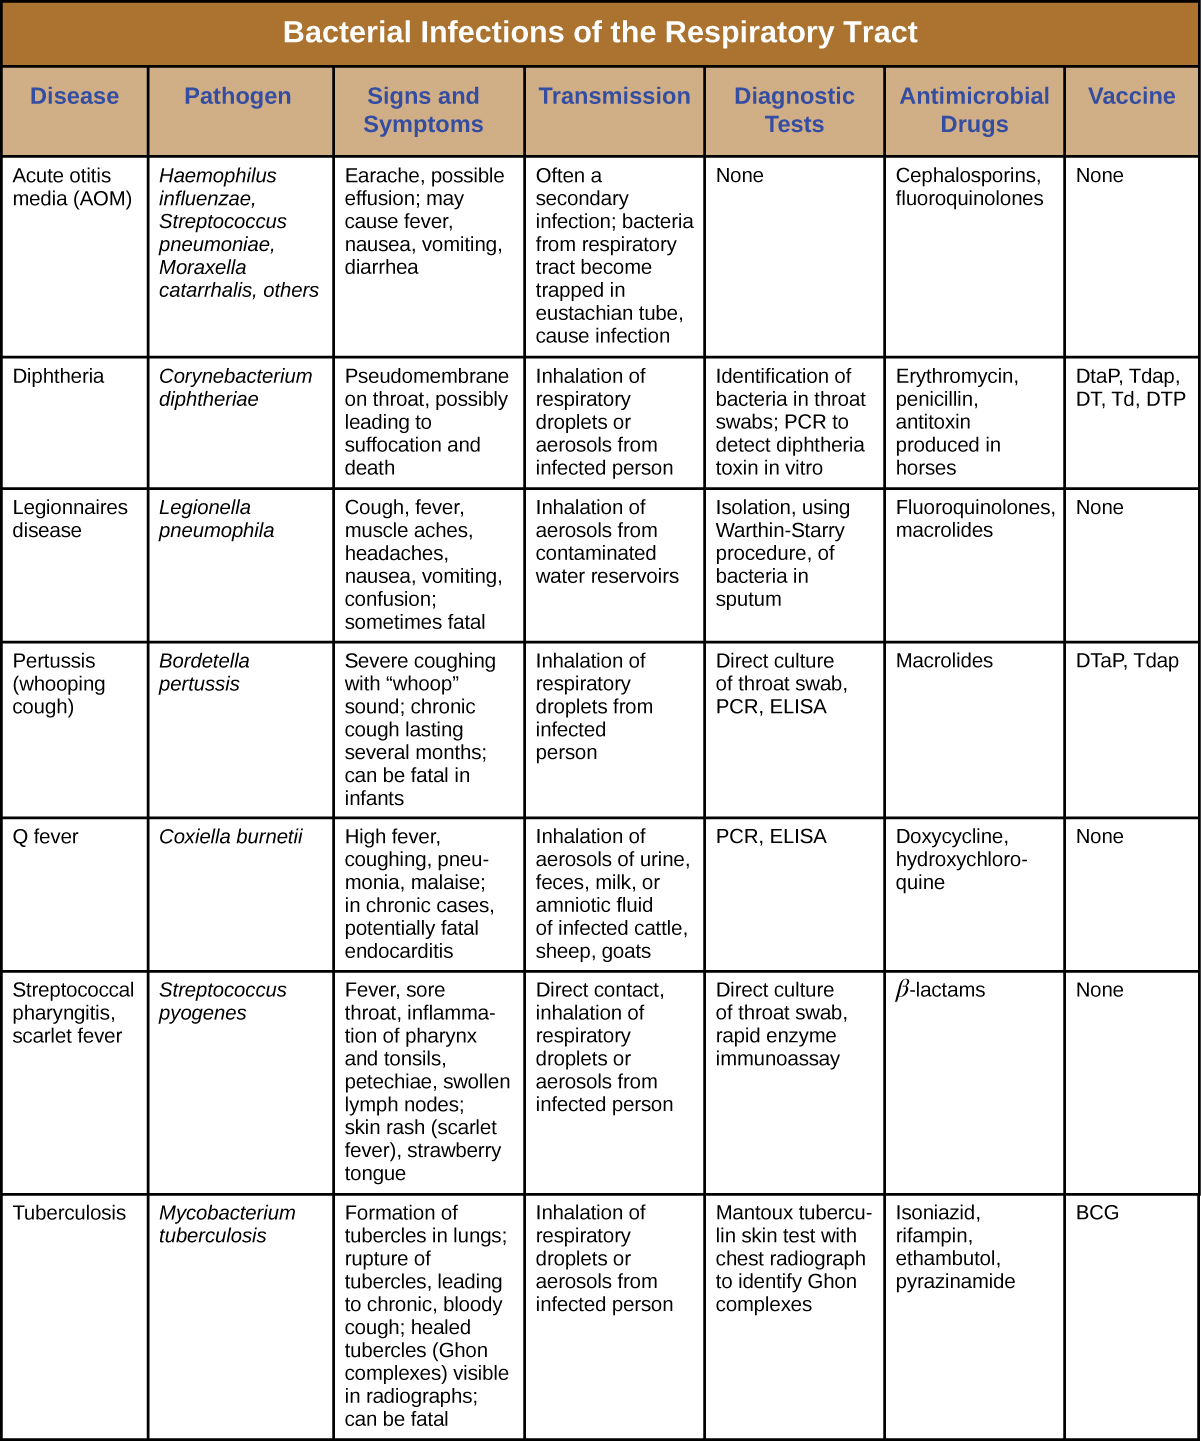 Table titled: Bacterial Infections of the Respiratory Tract. Columns: Disease, Pathogen, Signs and Symptoms, Transmission, Diagnostic Tests, Antimicrobial Drugs, Vaccine. Acute otitis media (AOM); Haemophilus influenzae, Streptococcus pneumoniae, Moraxella catarrhalis, others;  Earache, possible effusion; may cause fever, nausea, vomiting, diarrhea; Often a secondary infection; bacteria from respiratory tract become trapped in eustachian tube, cause infection; None; Cephalosporins, fluoroquinolones; None. Diphtheria; Corynebacterium diphtheria; Pseudomembrane on throat, possibly leading to suffocation and death; Inhalation of respiratory droplets or aerosols from infected person ; Identification of bacteria in throat swabs; PCR to detect diphtheria toxin in vitro; Erythromycin, penicillin, antitoxin produced in horses; DtaP, Tdap, DT, Td, DTP. Legionnaires disease; Legionella pneumophila; Cough, fever, muscle aches, headaches, nausea, vomiting, confusion; sometimes fatal; Inhalation of aerosols from contaminated water reservoirs; Isolation, using Warthin-Starry procedure, of bacteria in sputum; Fluoroquinolones, macrolides; None. Pertussis (whooping cough); Bordetella pertussis; Severe coughing with “whoop” sound; chronic cough lasting several months; can be fatal in infants; Inhalation of respiratory droplets from infected person; Direct culture of throat swab, PCR, ELISA Macrolides; DTaP, Tdap. Q fever; Coxiella burnetii; High fever, coughing, pneumonia, malaise; in chronic cases, potentially fatal endocarditis; Inhalation of aerosols of urine, feces, milk, or amniotic fluid of infected cattle, sheep, goats; PCR, ELISA; Doxycycline, hydroxychloroquine; None. Streptococcal pharyngitis, scarlet fever; Streptococcus pyogenes; Fever, sore throat, inflammation of pharynx and tonsils, petechiae, swollen lymph nodes; skin rash (scarlet fever), strawberry tongue; Direct contact, inhalation of respiratory droplets or aerosols from infected person Direct culture of throat swab, rapid enzyme immunoassay; β-lactams; None. Tuberculosis; Mycobacterium tuberculosis; Formation of tubercles in lungs; rupture of tubercles, leading to chronic, bloody cough; healed tubercles (Ghon complexes) visible in radiographs; can be fatal; Inhalation of respiratory droplets or aerosols from infected person Mantoux tuberculin skin test with chest radiograph to identify Ghon complexes; Isoniazid, rifampin, ethambutol, pyrazinamide; BCG.